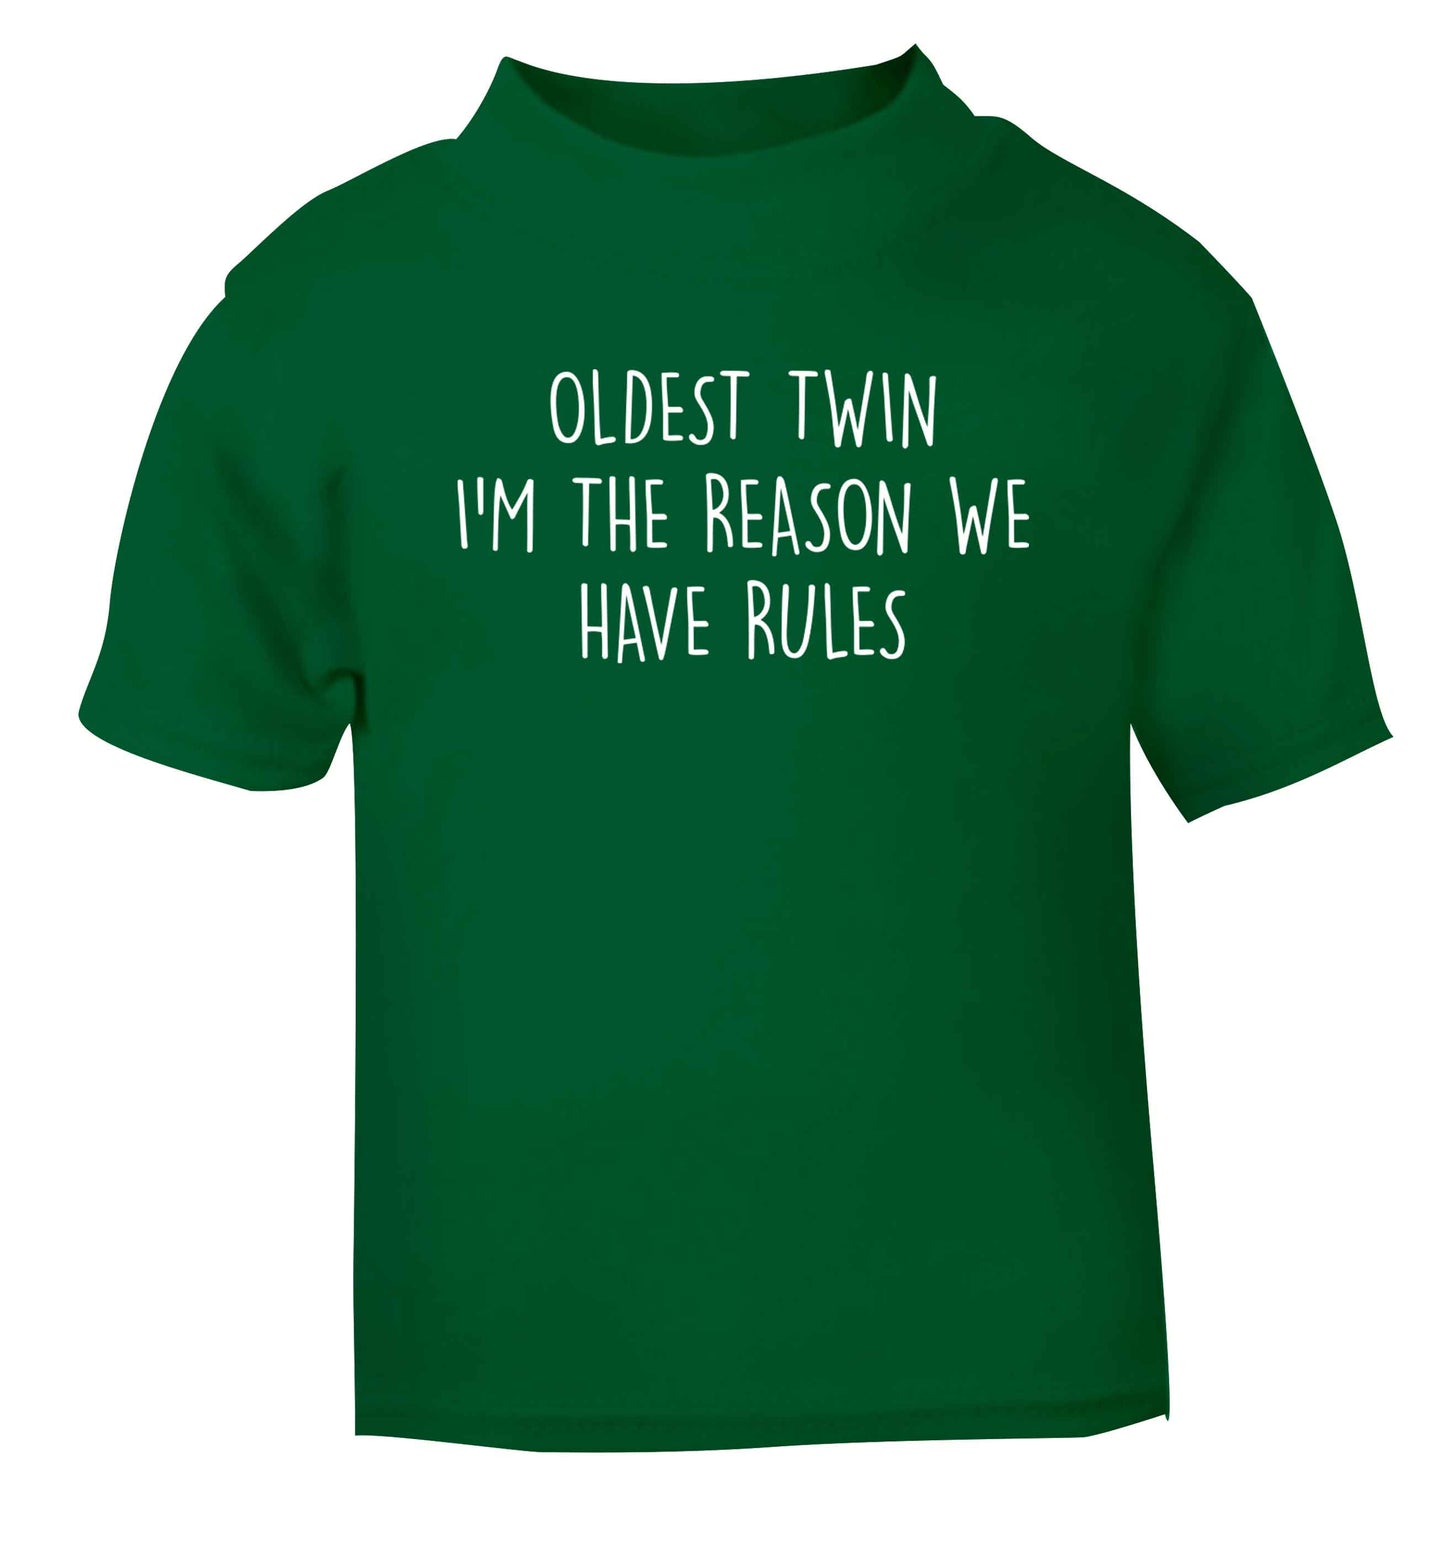 Oldest twin I'm the reason we have rules green baby toddler Tshirt 2 Years